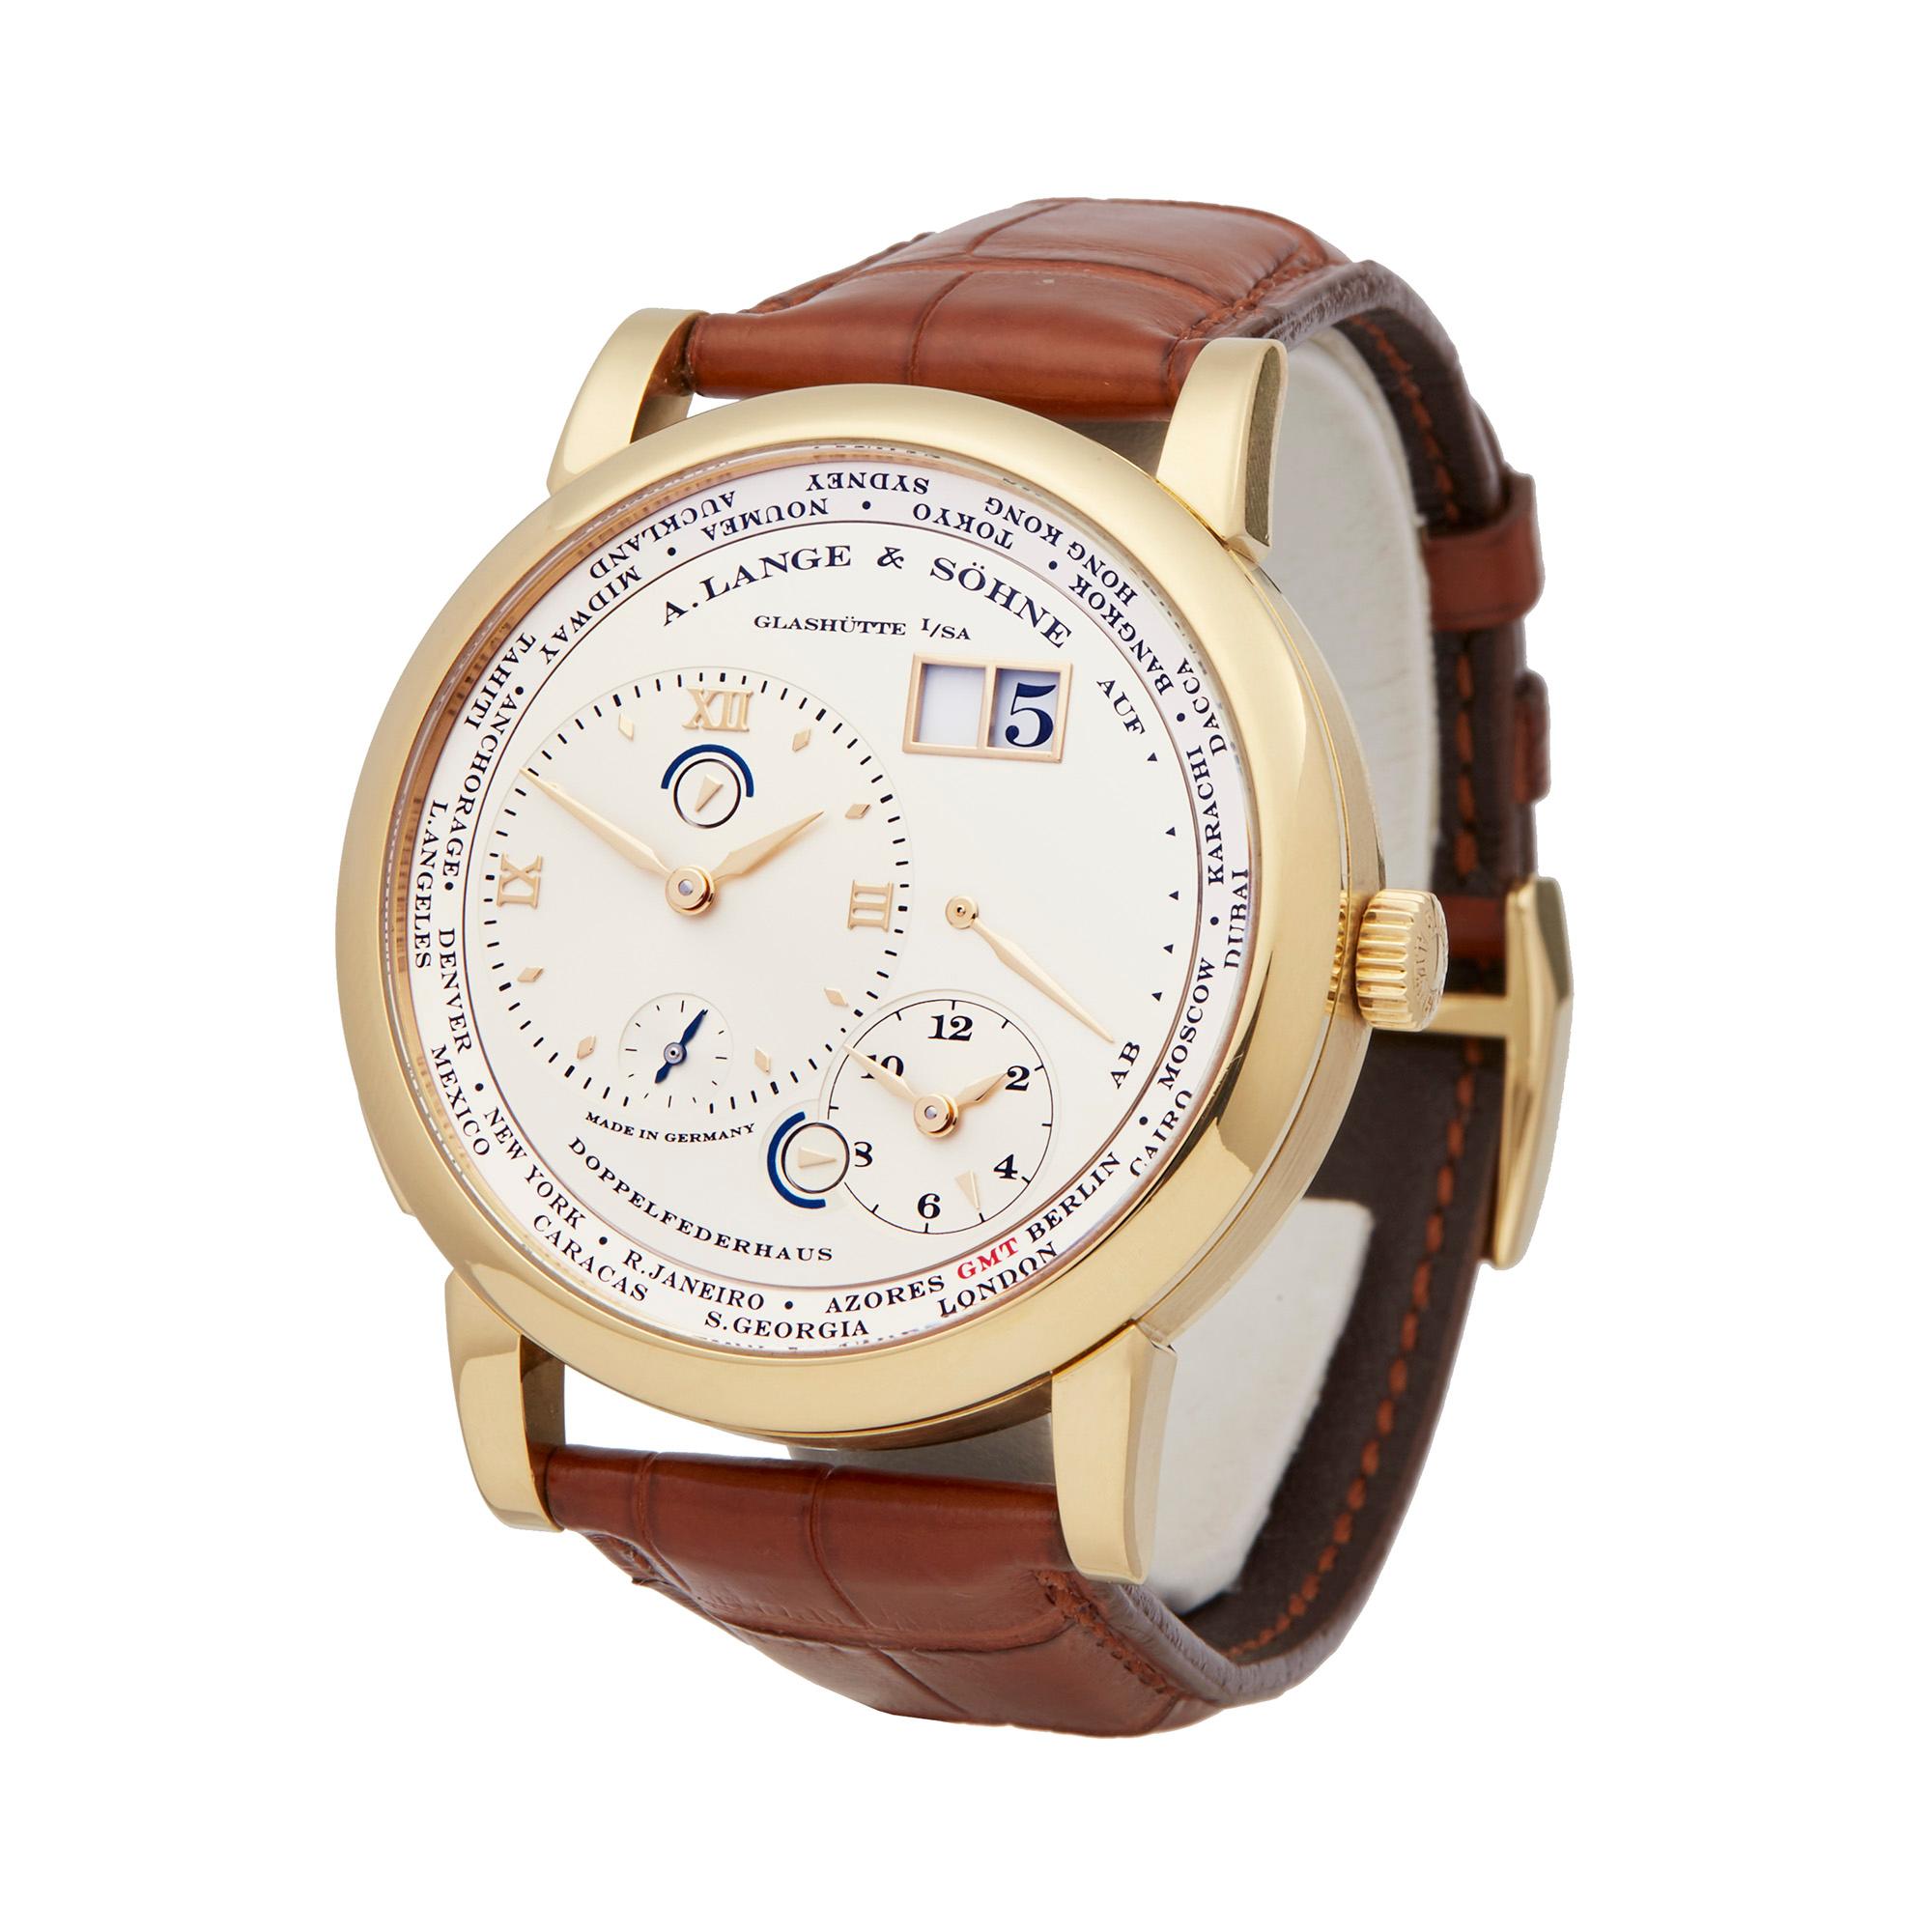 Reference: W5492
Manufacturer: A. Lange & Sohne
Model: Lange 1
Model Reference: 116.021
Age: 2nd May 2006
Gender: Men's
Box and Papers: Box, Manuals and Guarantee
Dial: Silver Roman
Glass: Sapphire Crystal
Movement: Mechanical Wind
Water Resistance: